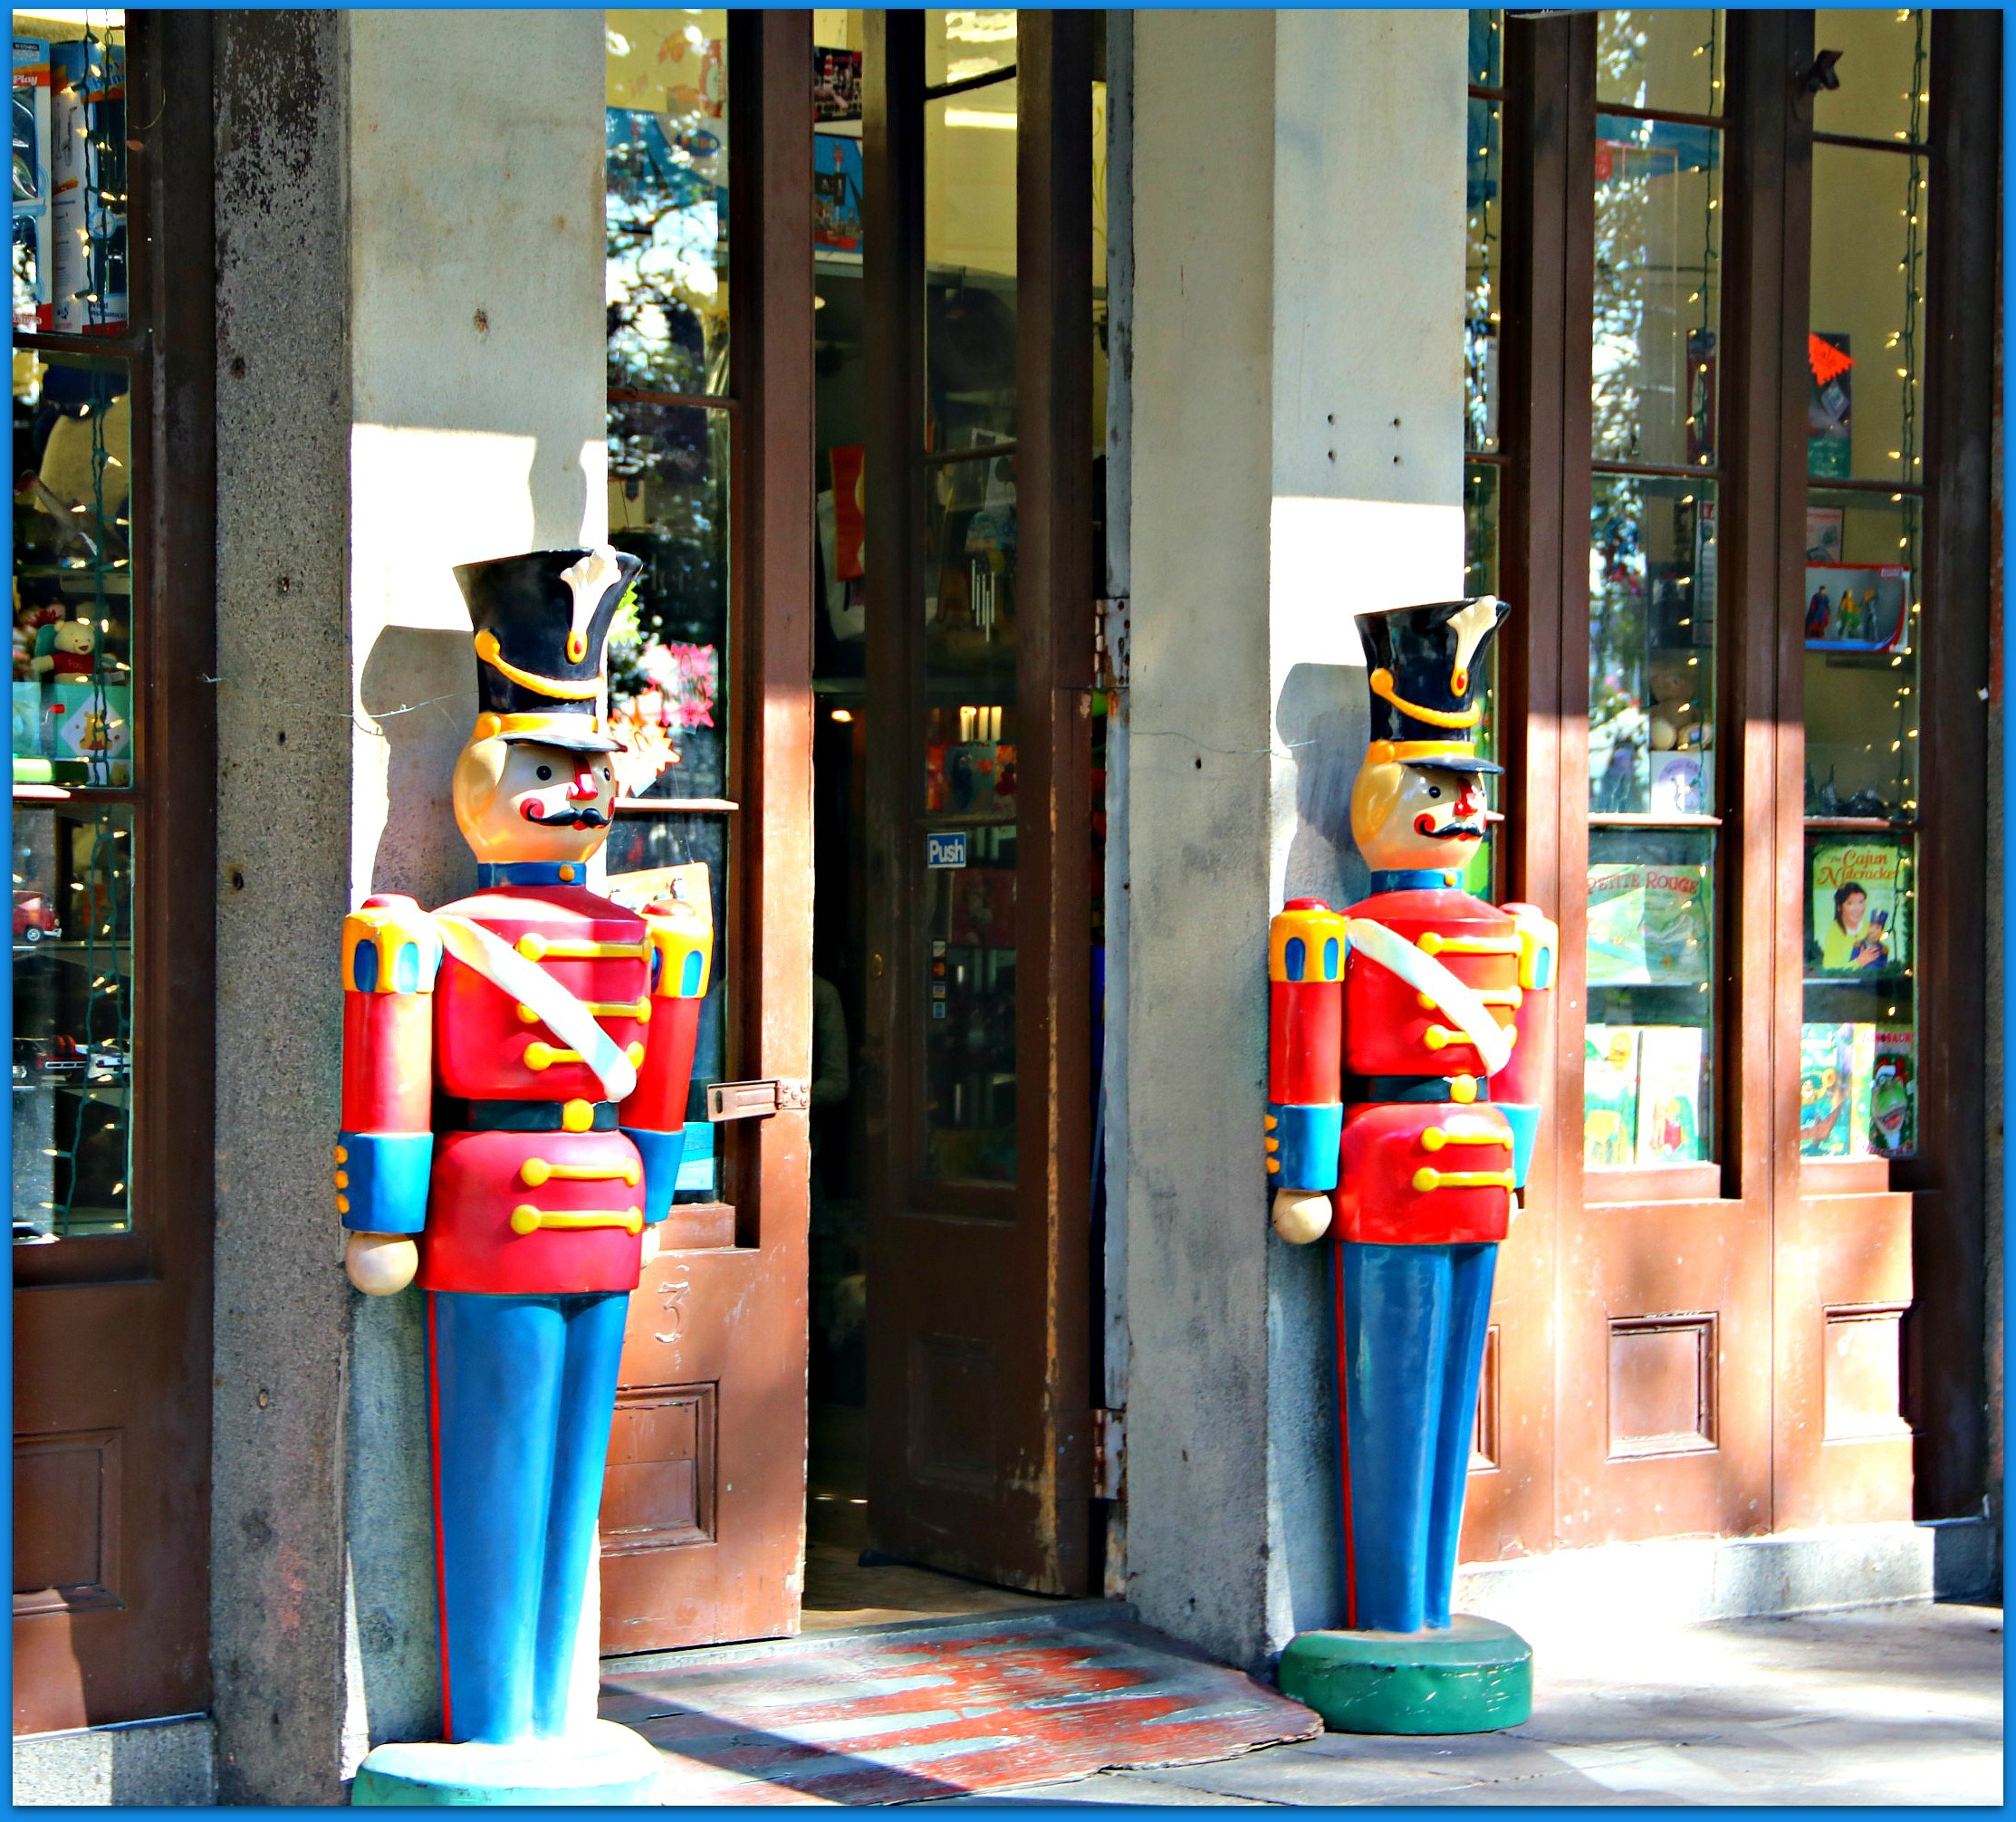 -tOY_sTORE_AT_jACKSON_sQUARE.jpg